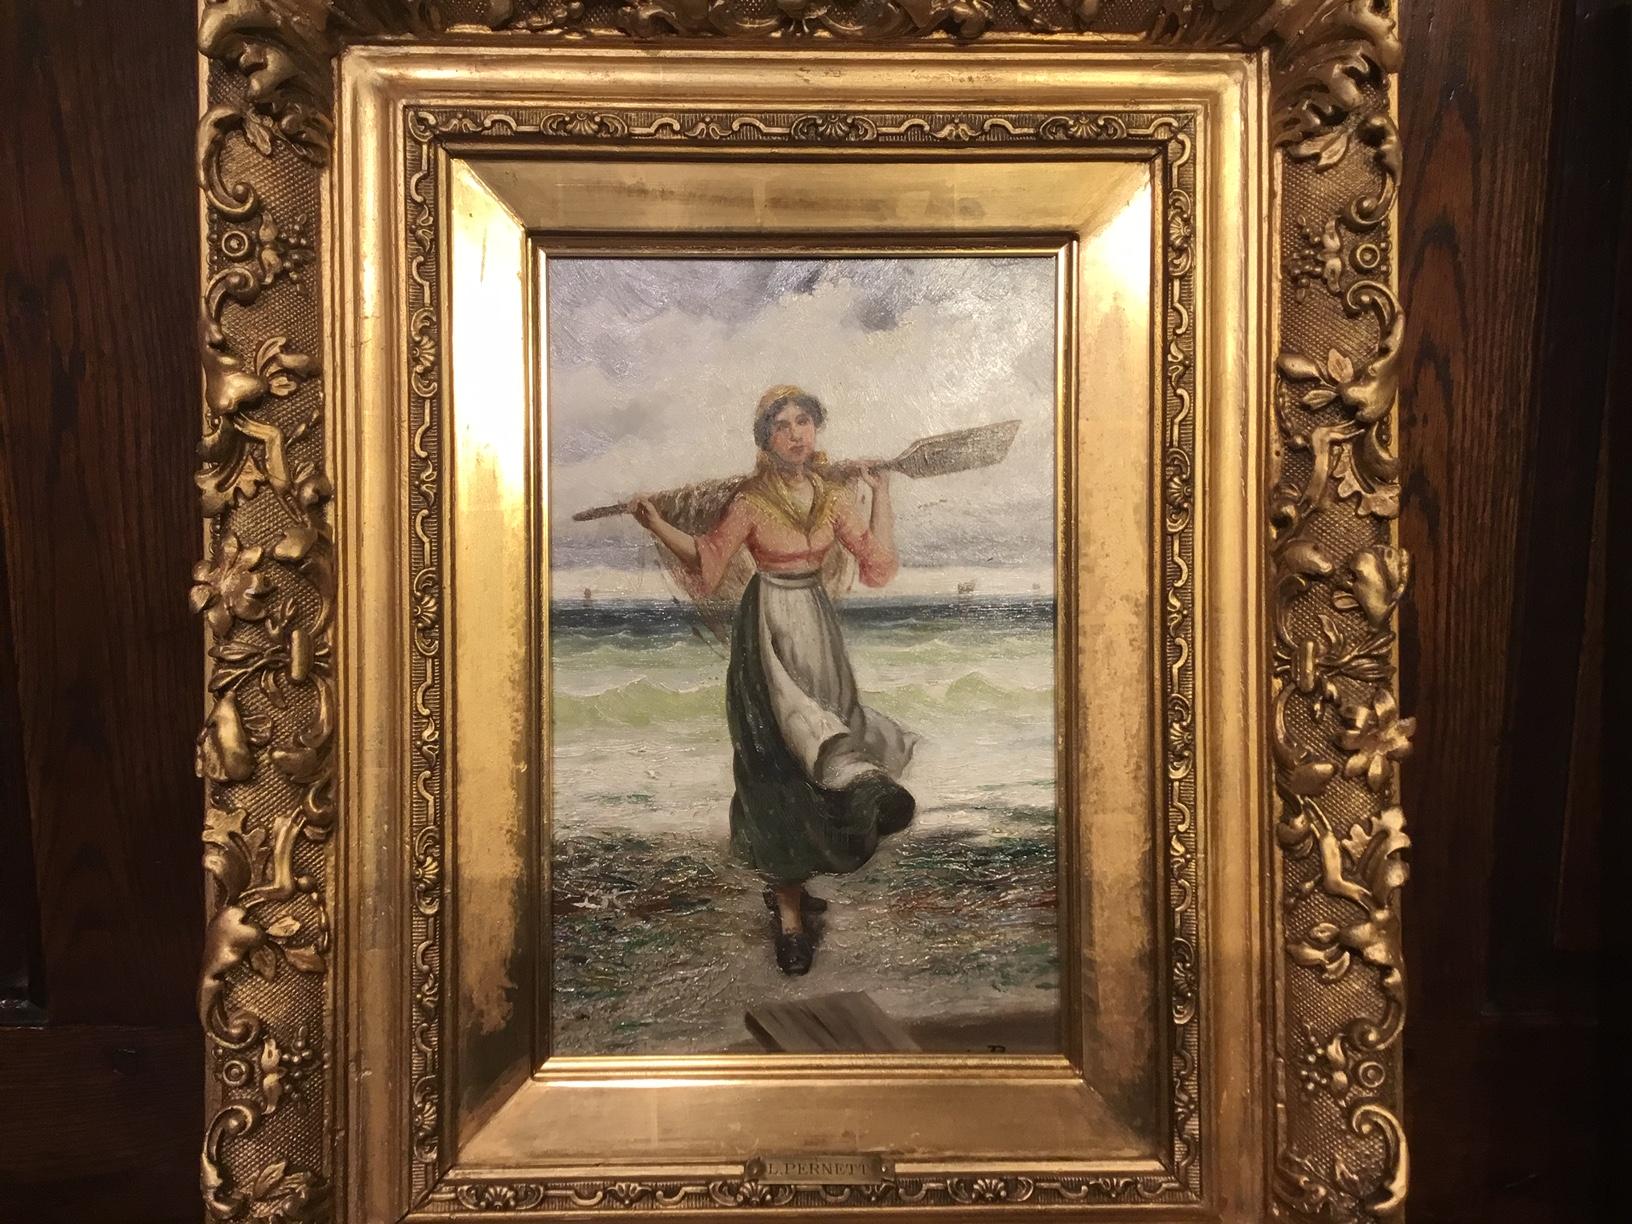 A pair of 19th century oil paintings by L. Pernett depicting a Breton fisherman and fisherwoman, housed in their original finely carved giltwood frames, titled en verso and with monogram. French circa 1890-1900

Dimensions: Frames 20